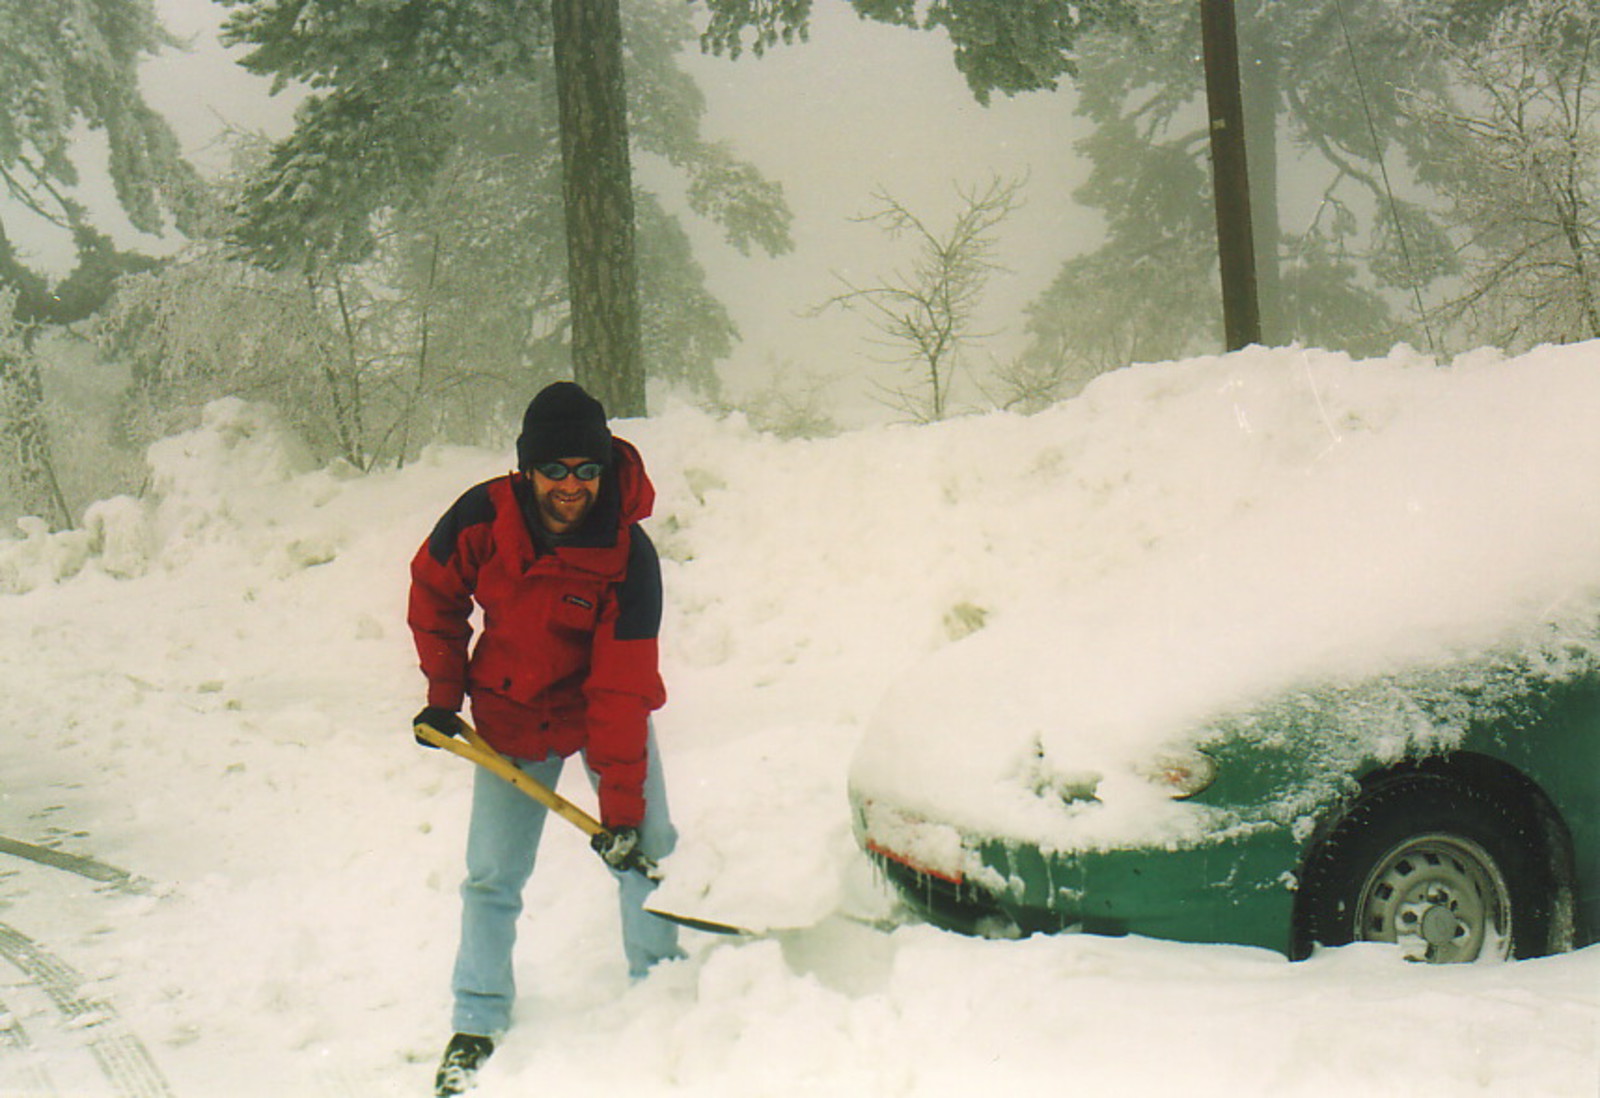 Mark digging a car out of a snowdrift